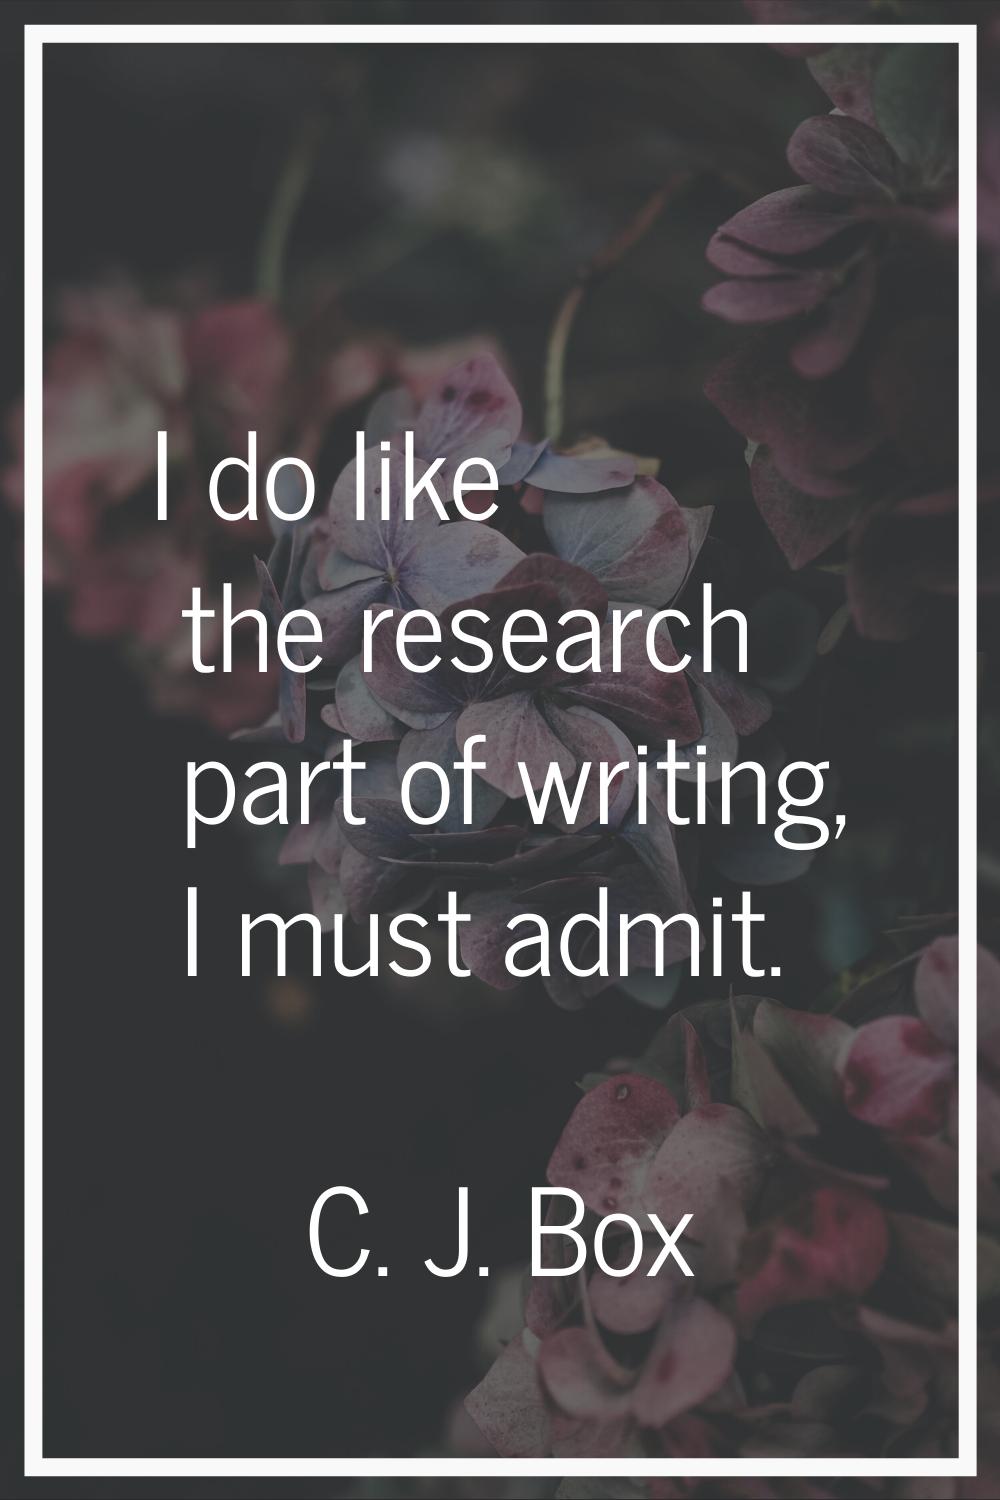 I do like the research part of writing, I must admit.